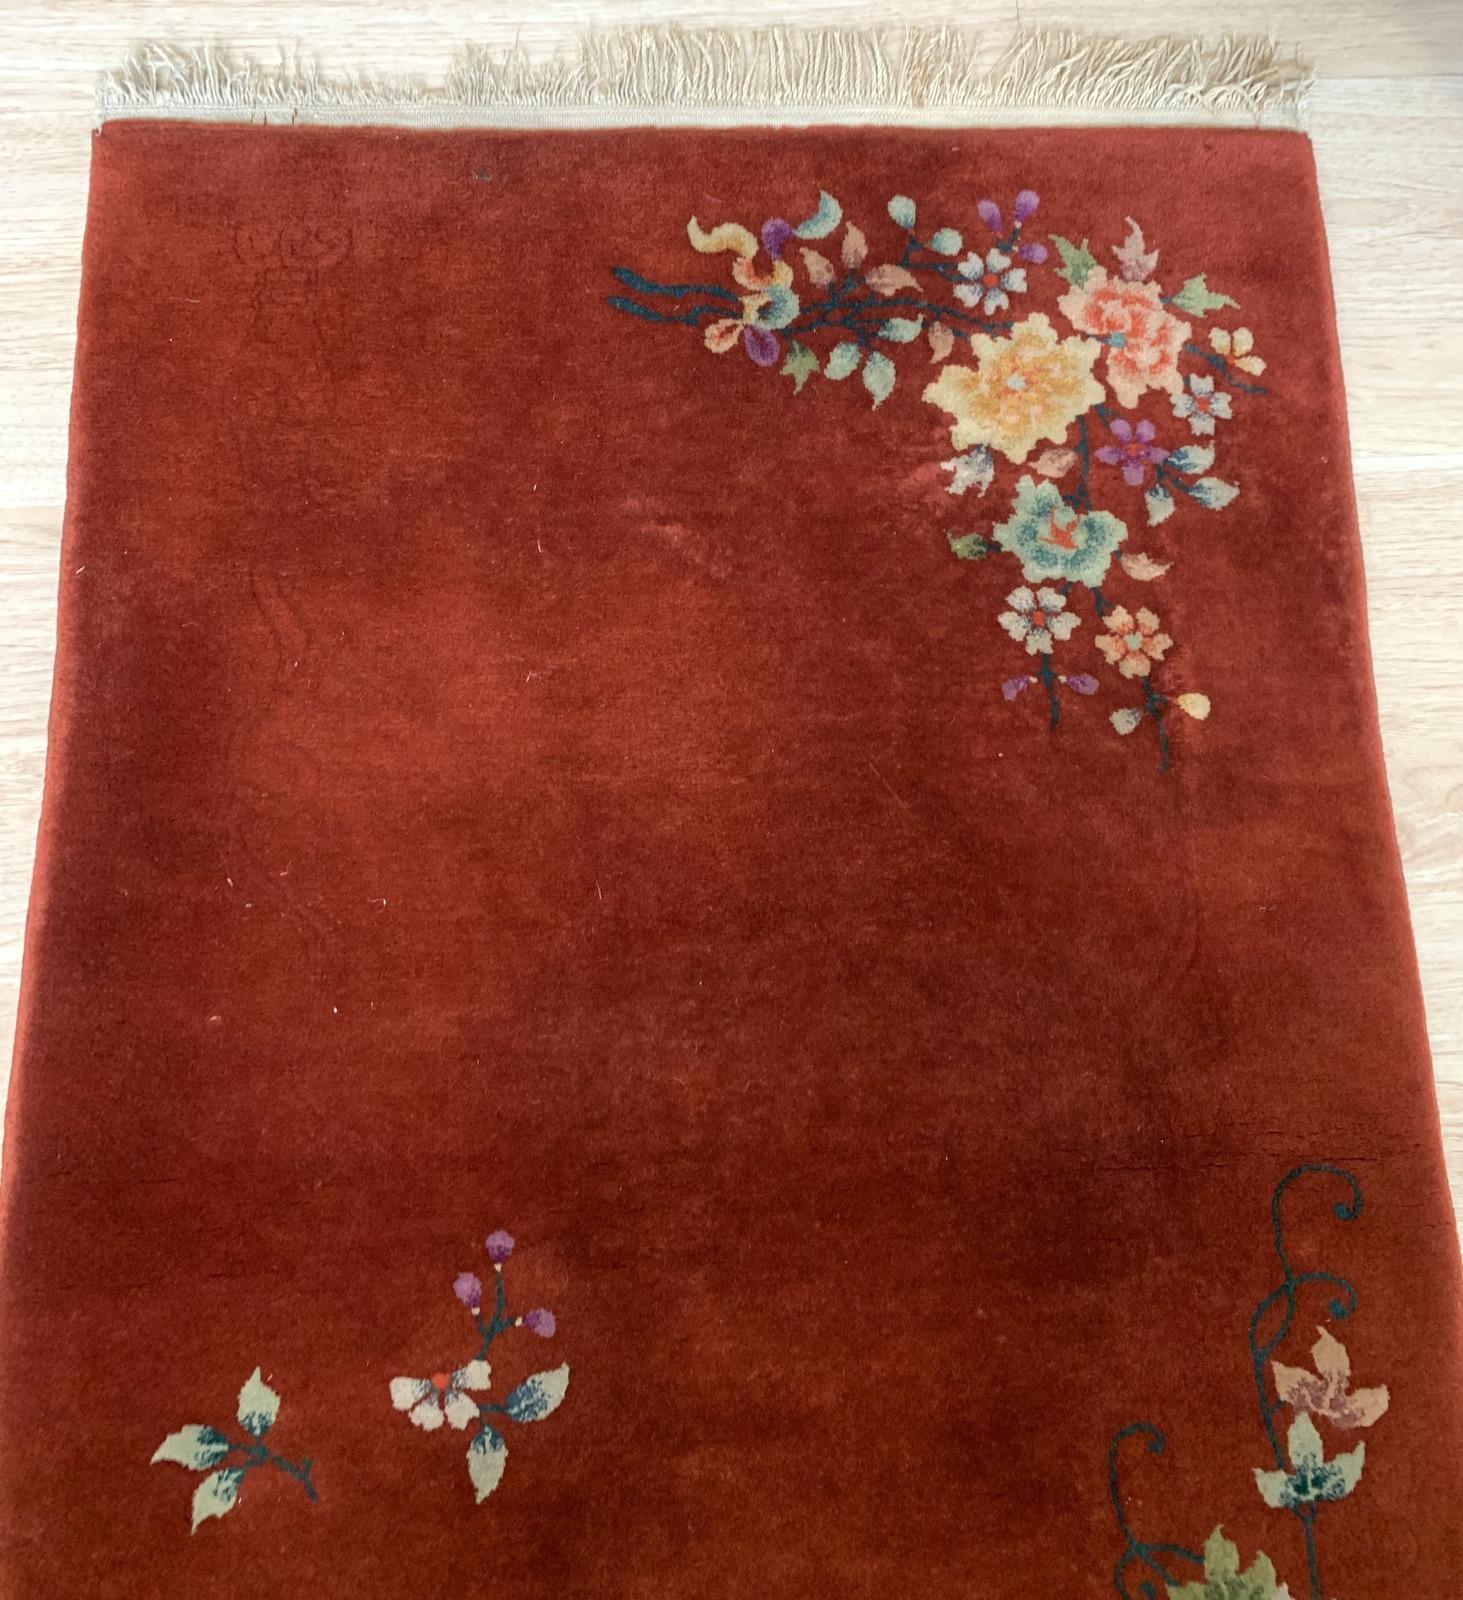 Handmade antique Art Deco Chinese rug in original good condition. The rug is from the beginning of 20th century. 

-condition: original good,

-circa: 1920s,

-size: 3.1' x 4.10' (94cm x 151cm)?,

-material: wool,

-country of origin: